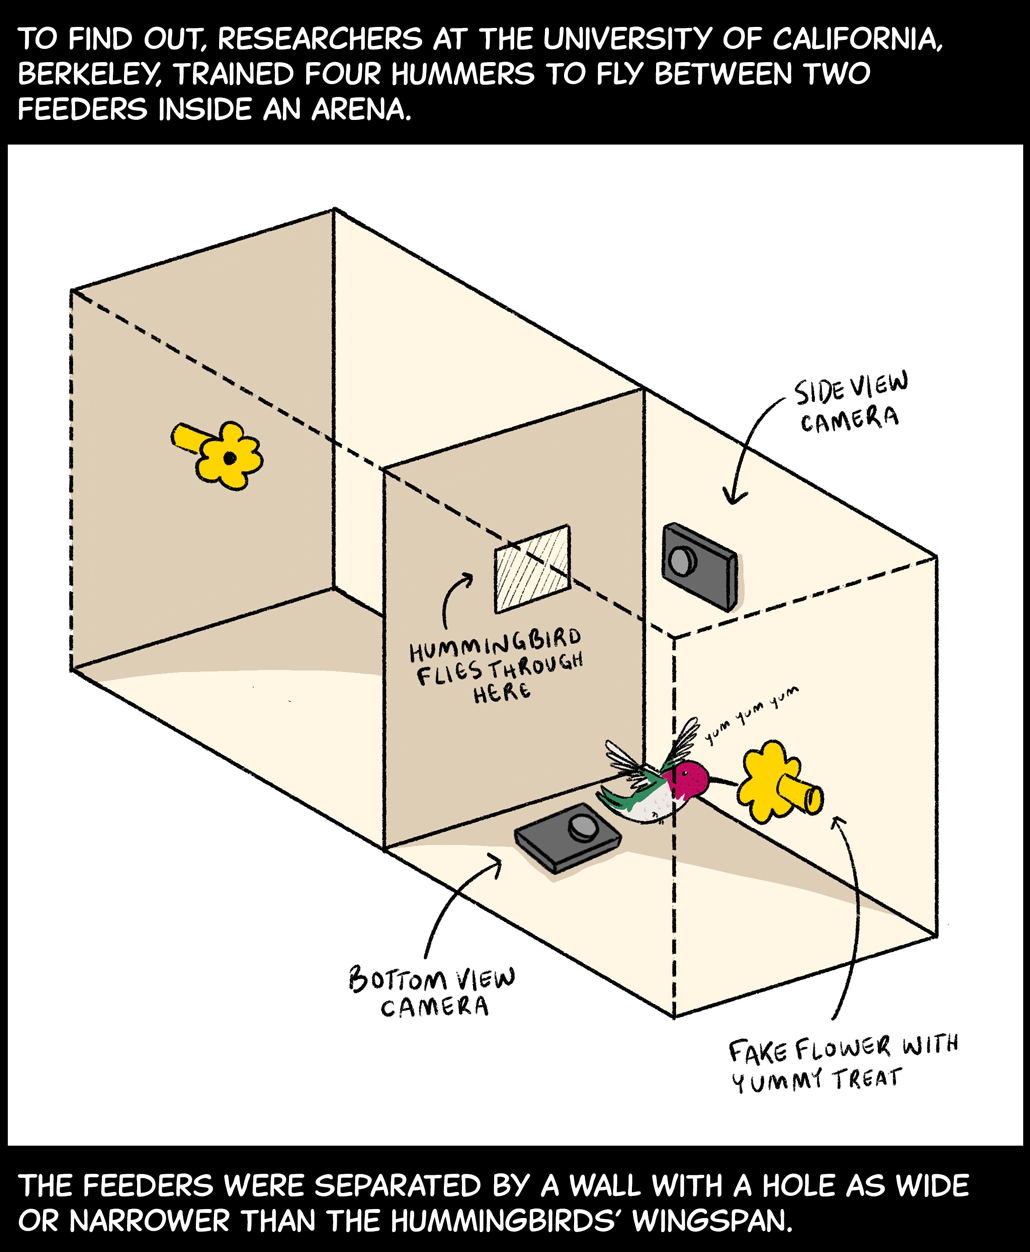 To find out, researchers at the University of California, Berkeley, trained four hummers to fly between two feeders inside an arena. Image: A diagram shows the layout of a two-roomed arena. In the front room, a hummingbird drinks from a fake yellow flower on the wall. The hummingbird is saying, “Yum, yum, yum.” Two cameras watch the hummingbird from the floor and another wall of this room. A third wall of the room has a small hole in it. The hummingbird can fly through this hole to reach the second room of the arena, which has its own fake flower that the hummingbird can drink from. Text (below image): The feeders were separated by a wall with a hole as wide or narrower than the hummingbirds’ wingspan. 